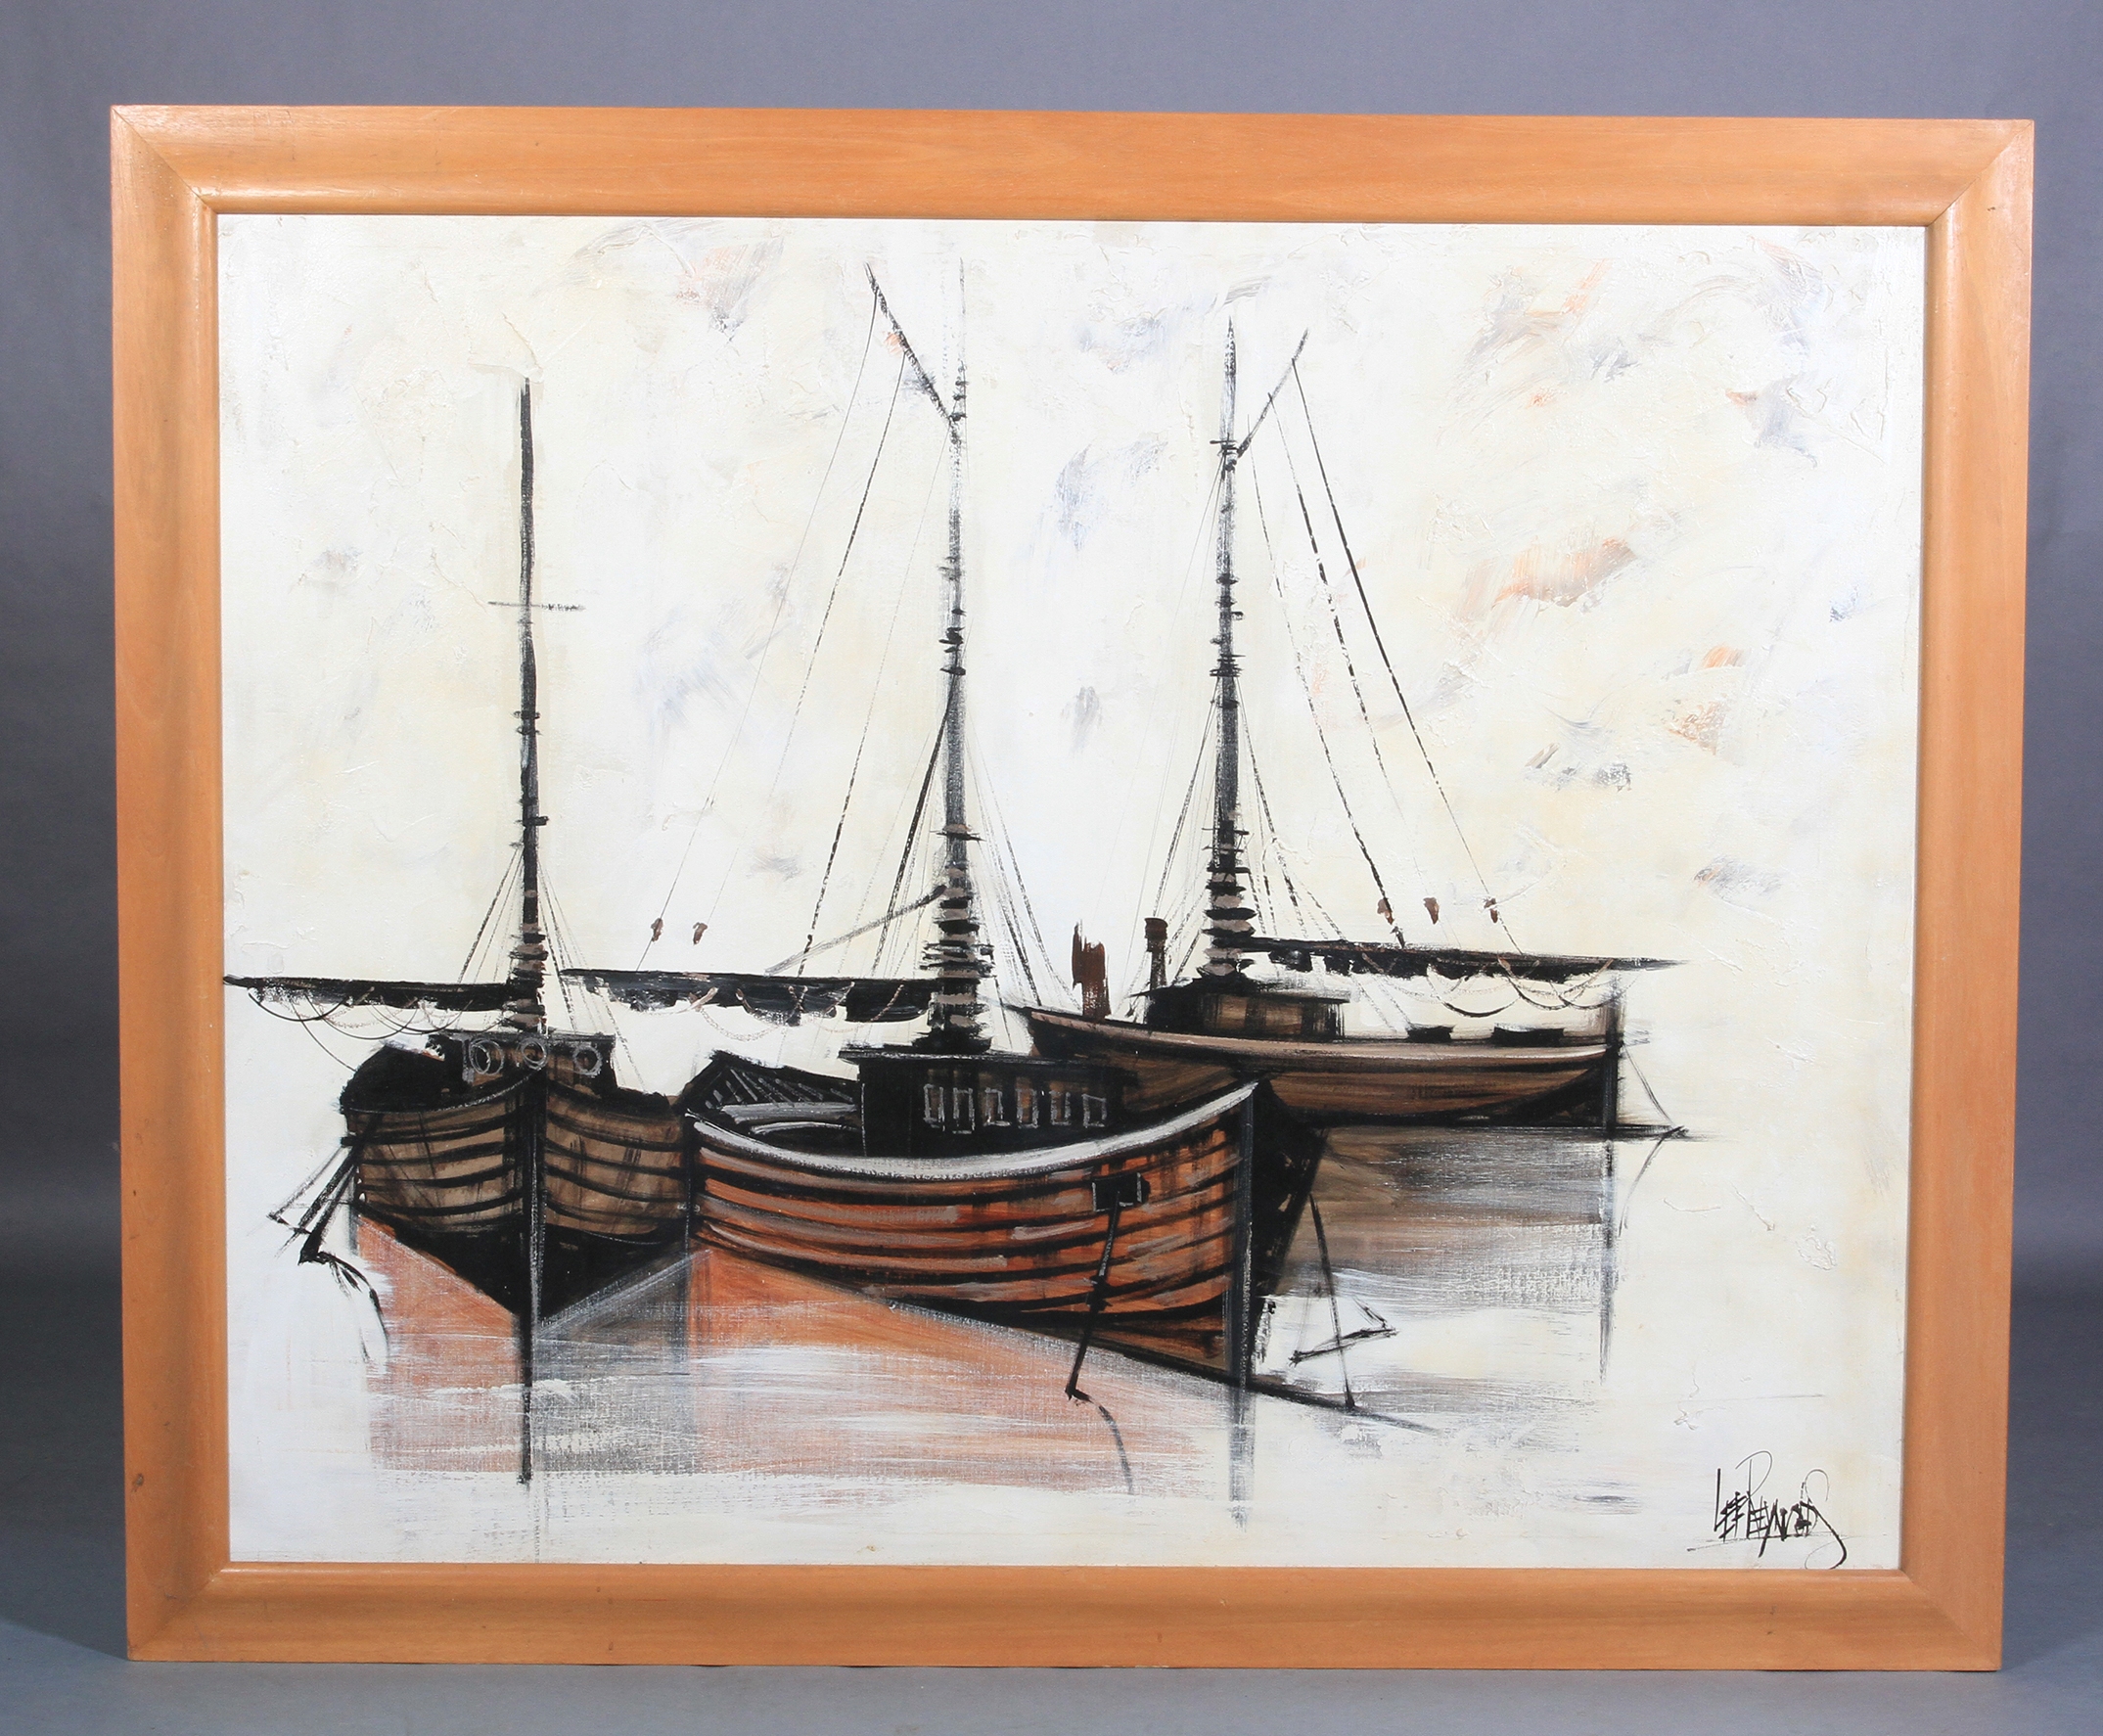 Lee Reynolds (20th century, American) Fishing boats with anchor, oil on canvas, signed to lower